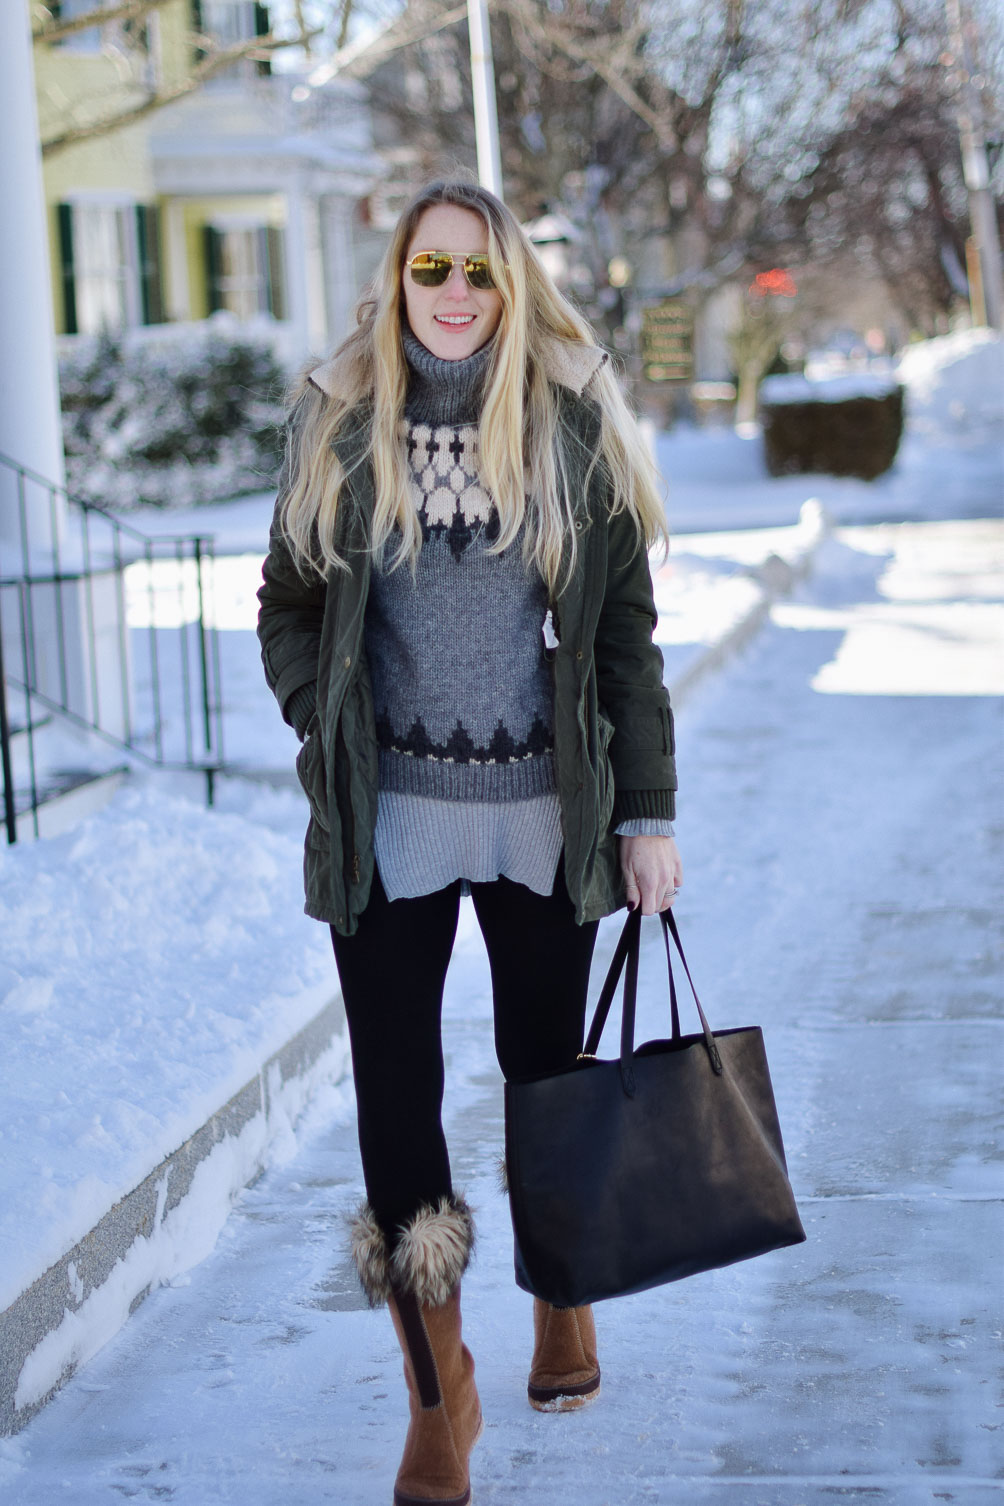 styling wool winter boots with faux fur accents, a turtleneck sweater, and velvet lined leggings 